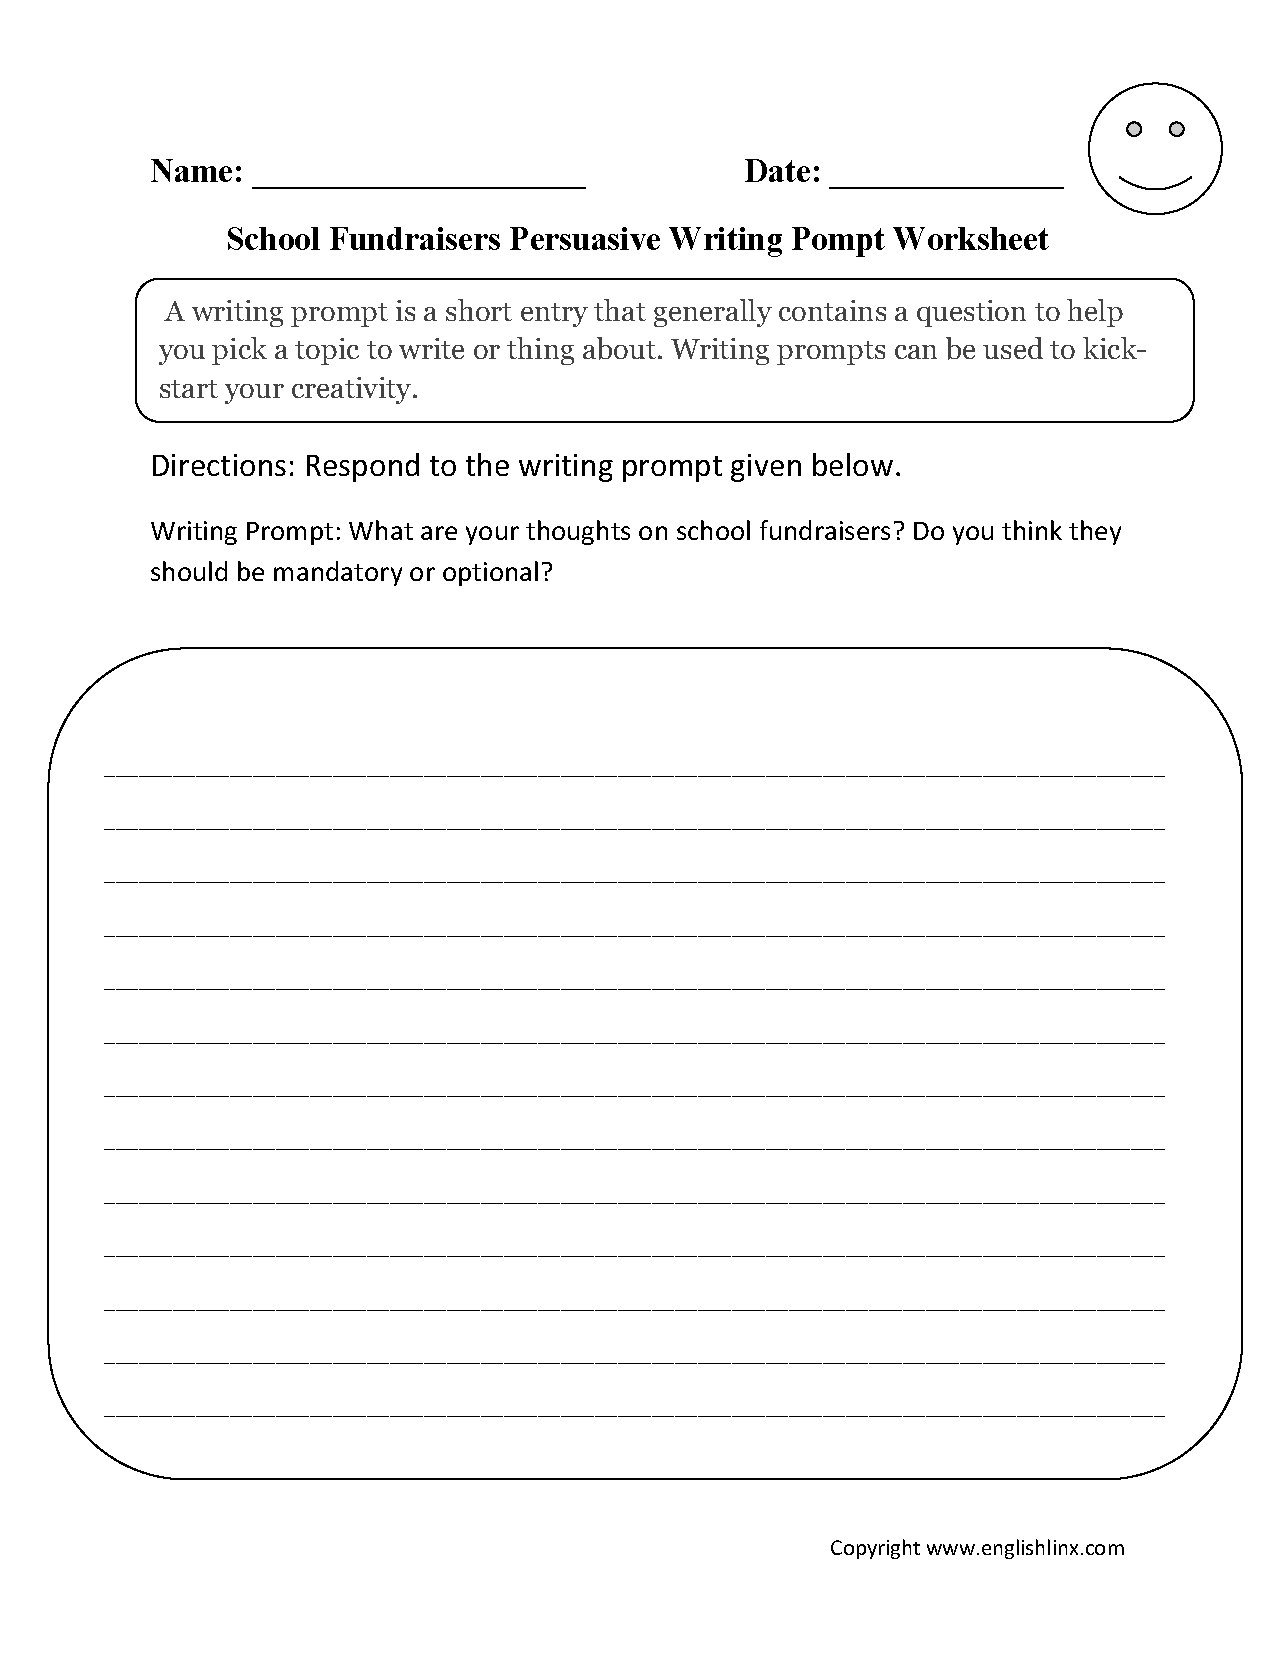 luxury-4th-grade-writing-worksheets-gallery-rugby-rumilly